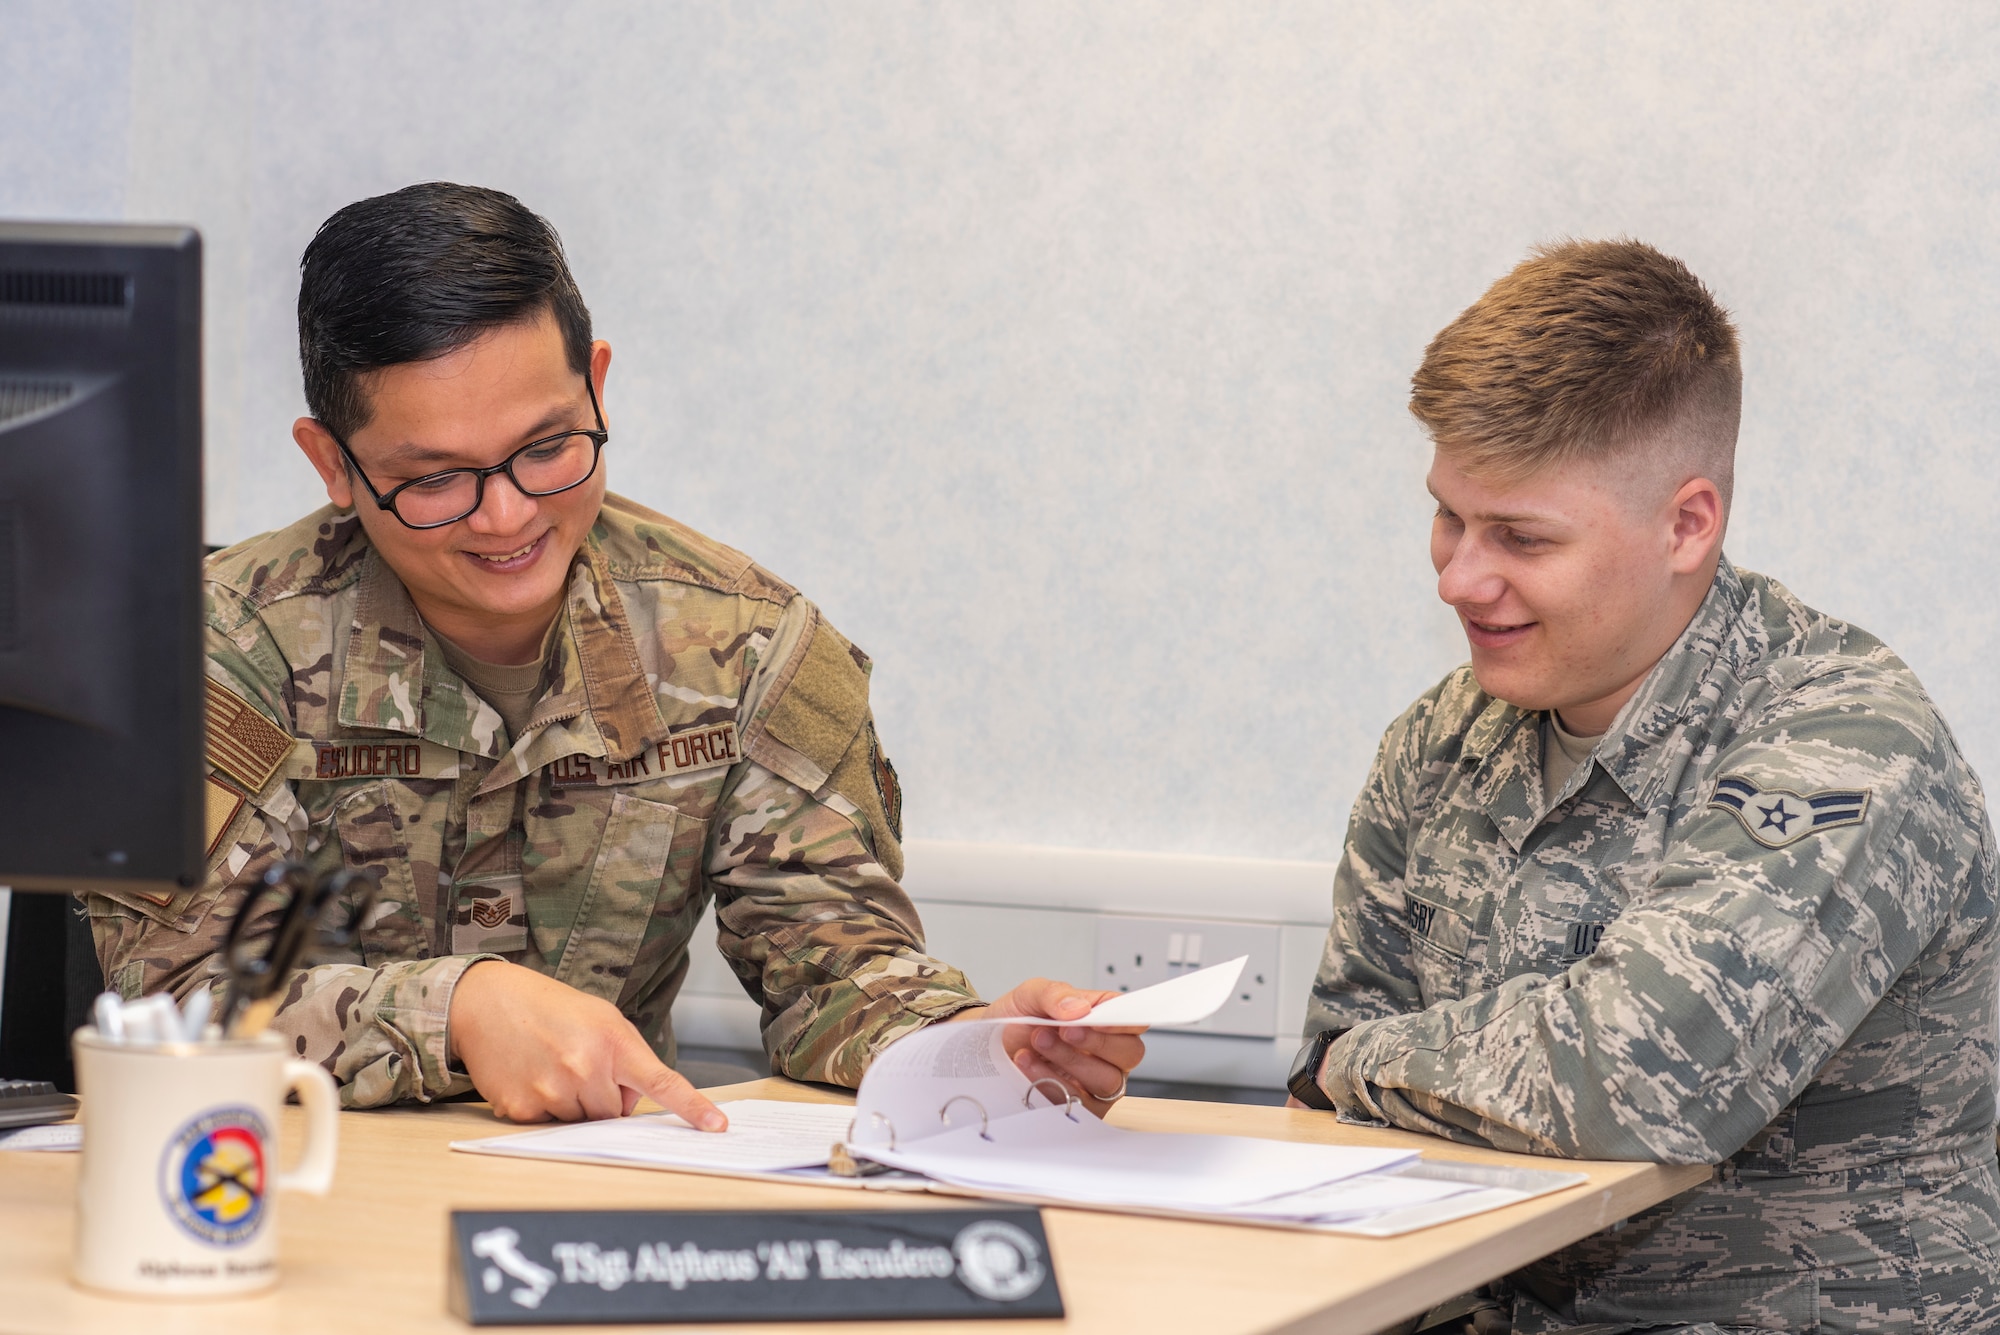 U.S. Air Force Tech. Sgt. Alpheus Escudero, 100th Force Support Squadron unit training manager, speaks with Airman 1st Class David Busby, 100th Air Refueling Wing broadcast journalist, about his Career Development Course volumes Oct. 1, 2019, at RAF Mildenhall, England. Unit training managers qualify Airmen to perform their jobs by tracking training requirements. (U.S. Air Force photo by Airman 1st Class Joseph Barron)